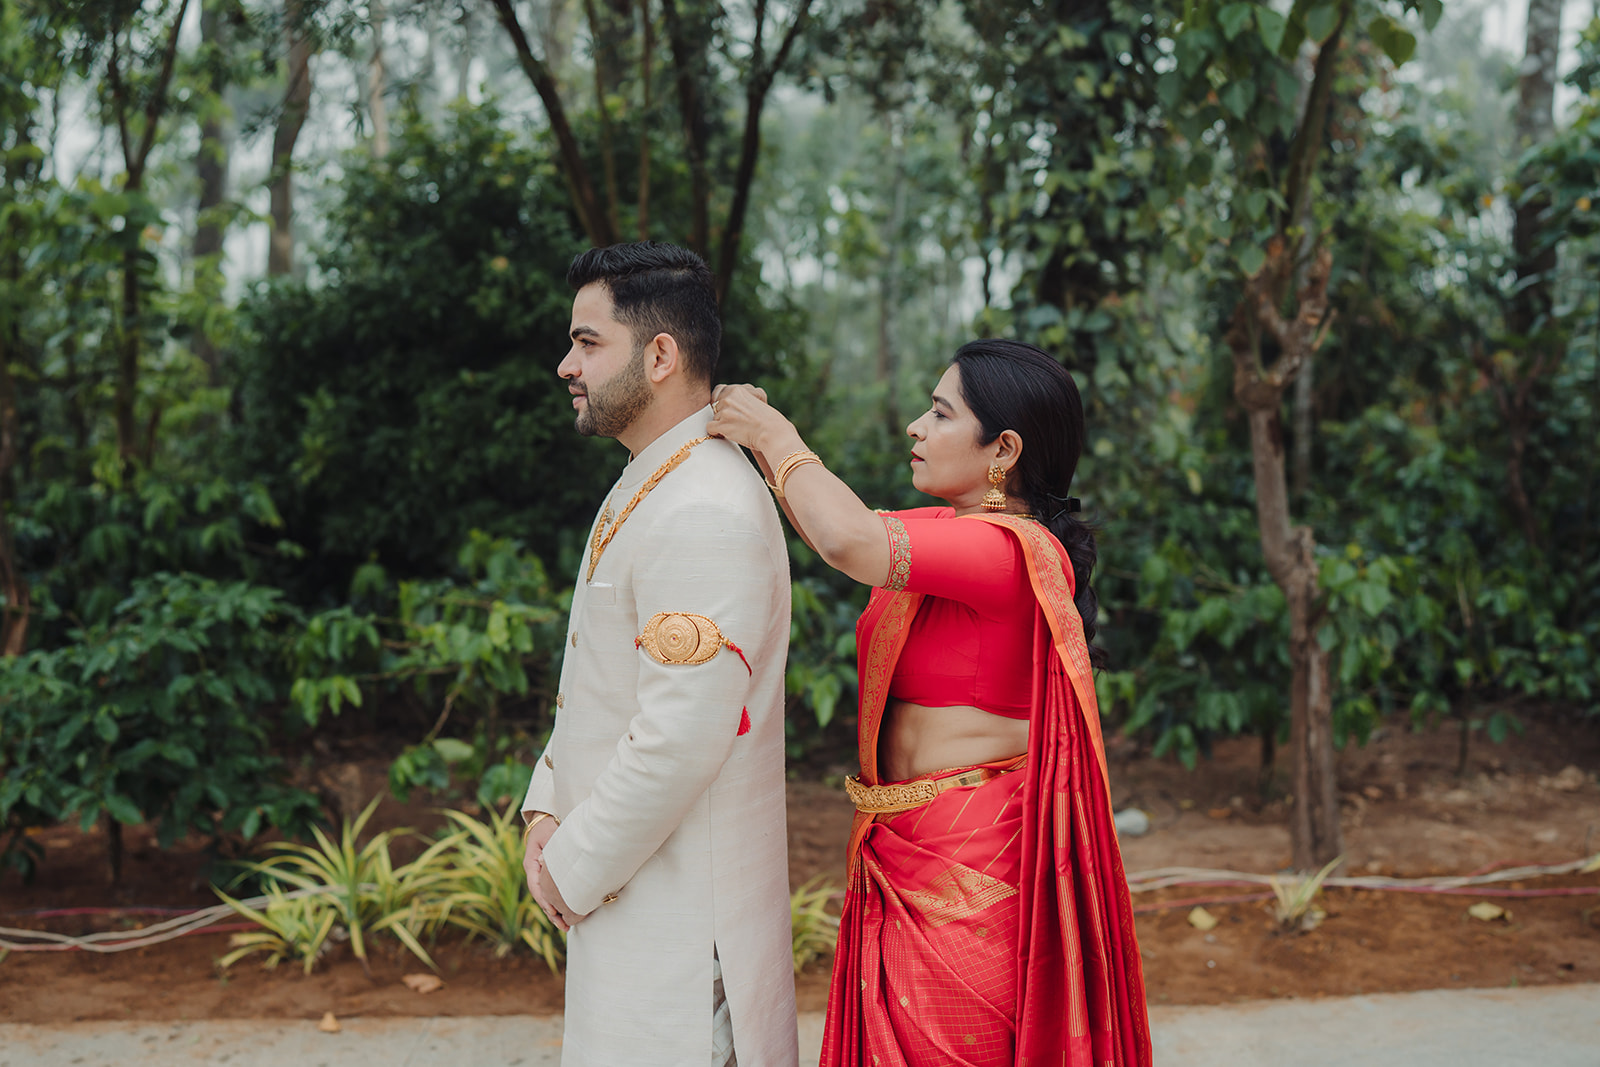 Cultural charm: Groom wears traditional jewelry, adding flair to his attire